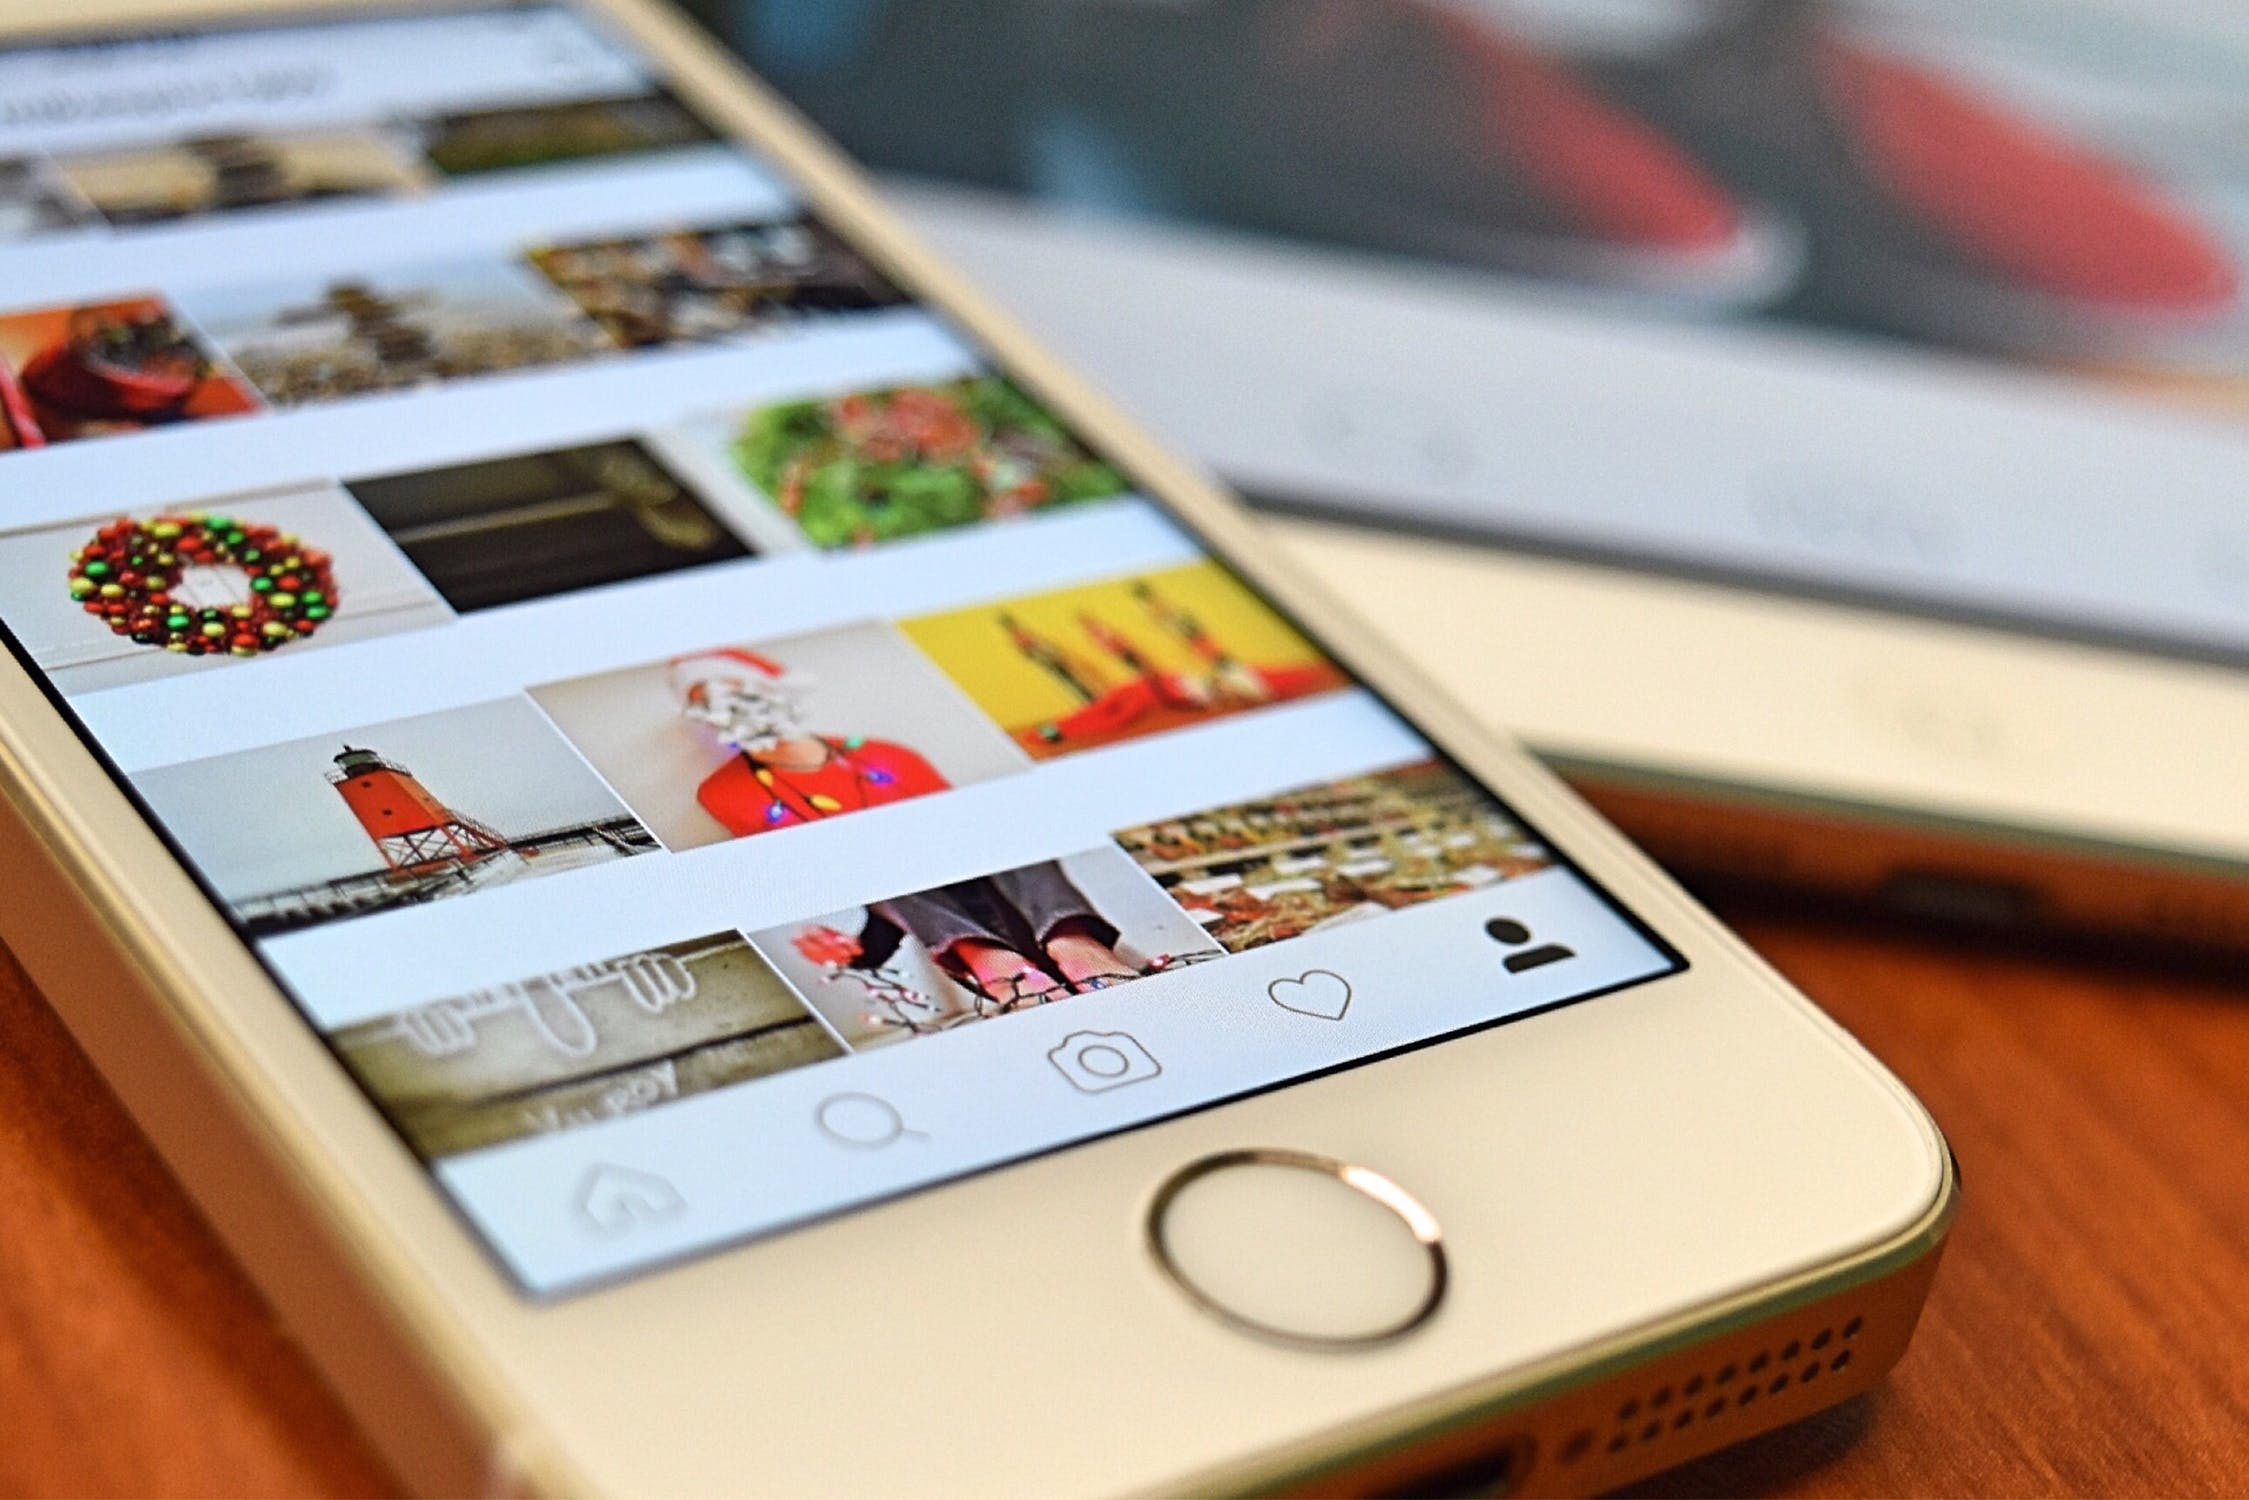 How to search for specific things in the photos app: